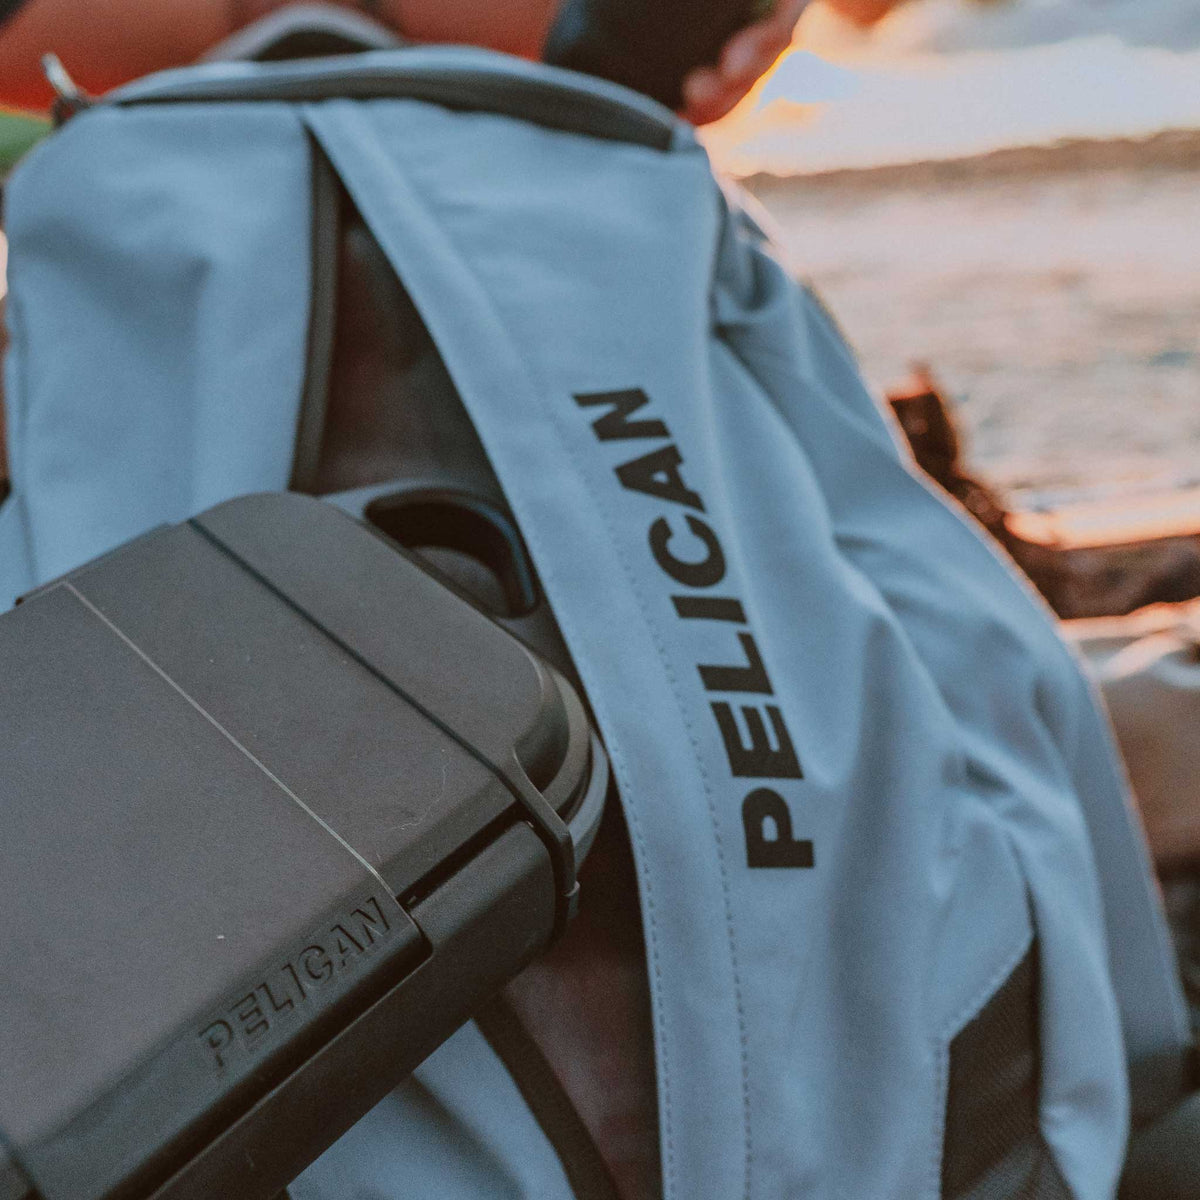 Pelican MPB20 Backpack comes with an easy access front pocket